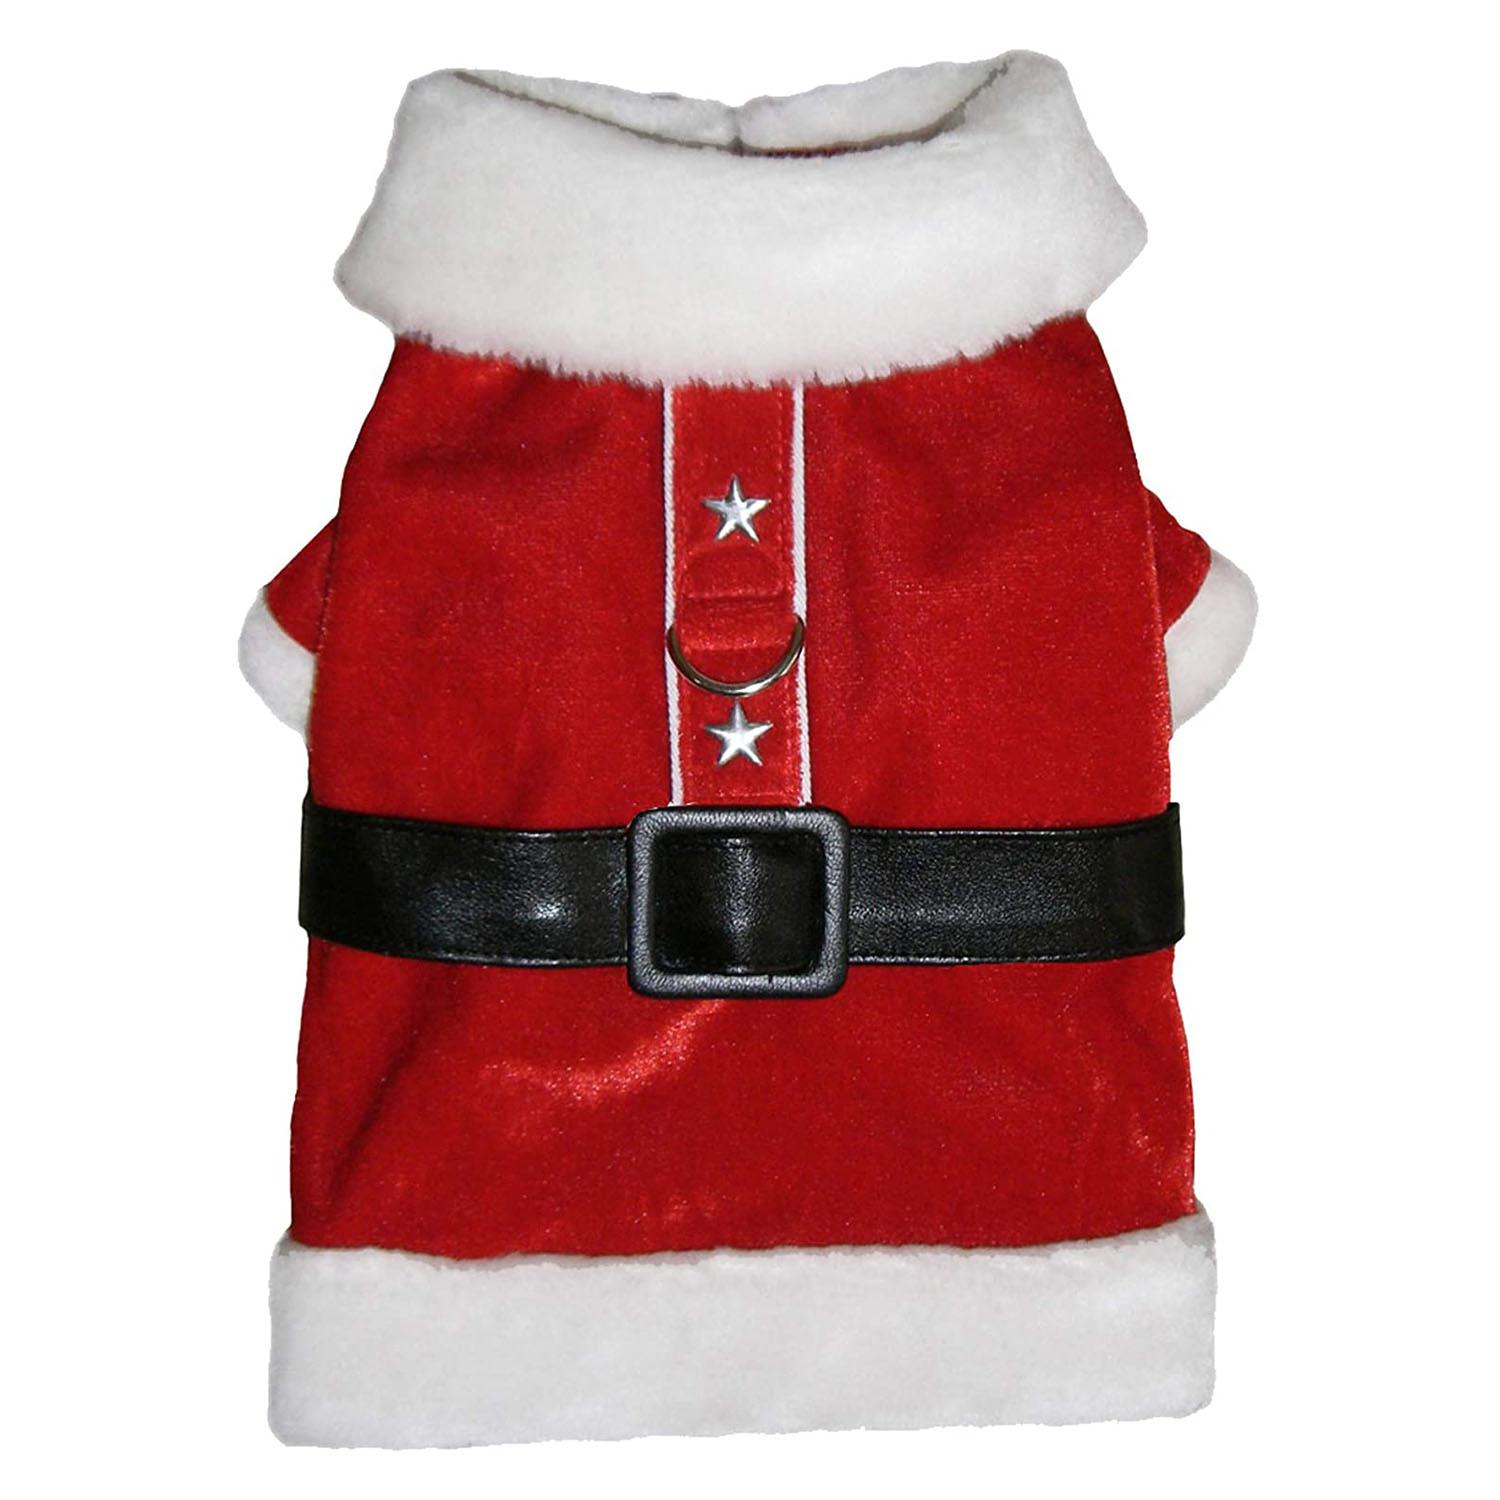 Pooch Outfitters Santa Paws Dog Coat